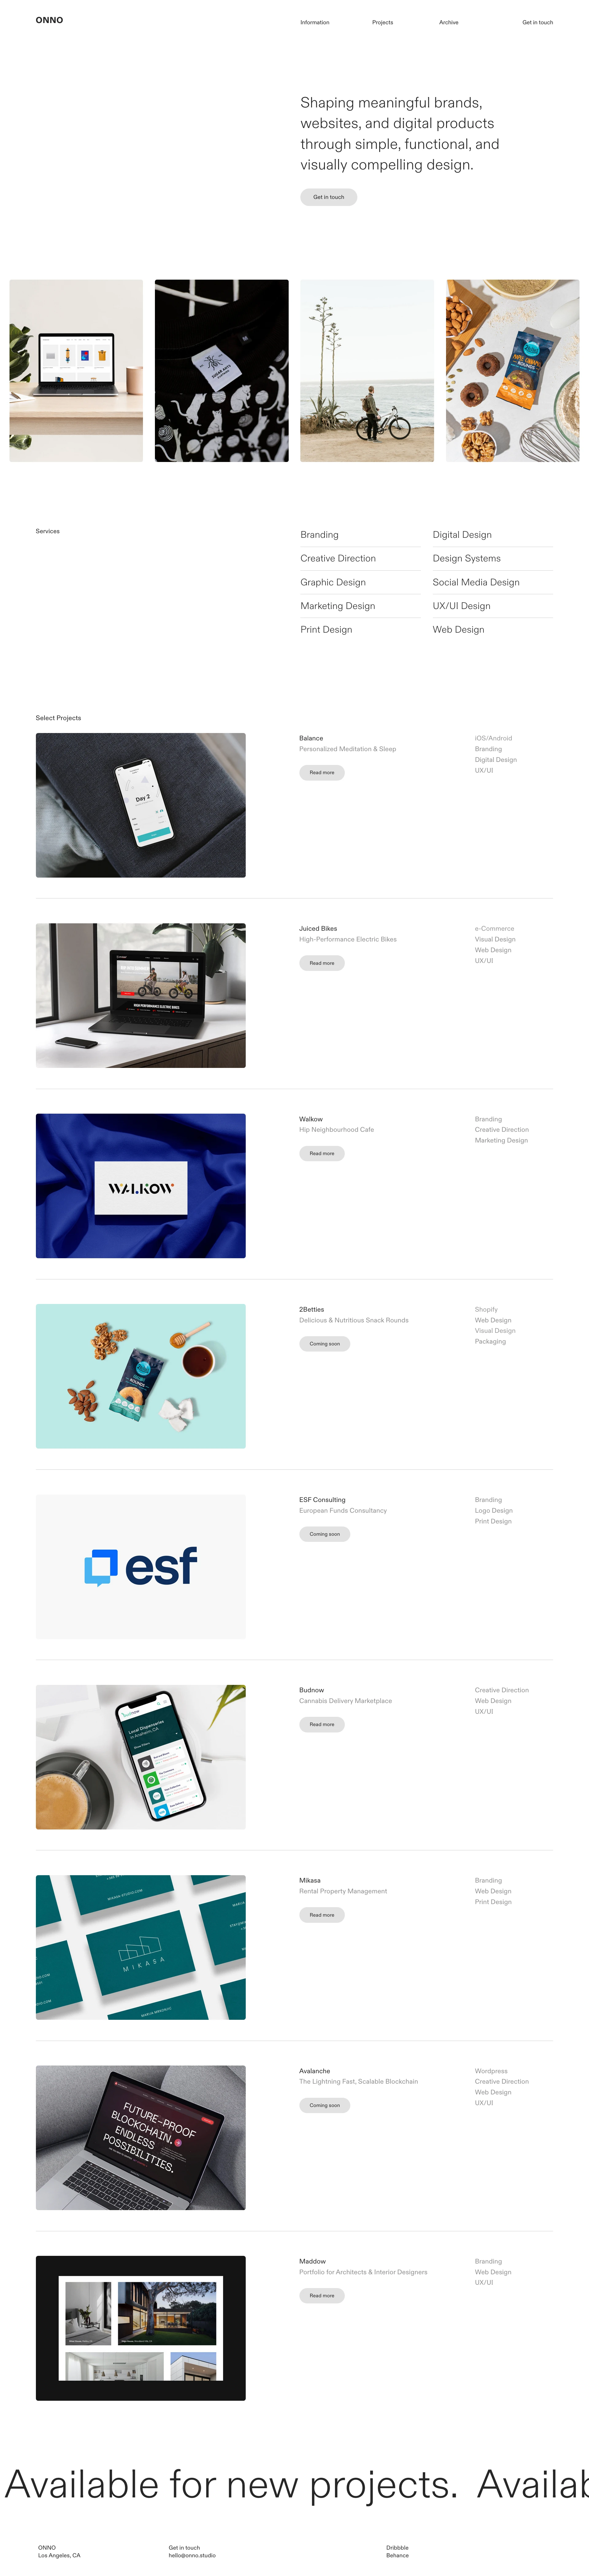 ONNO Landing Page Example: Digital & Brand Design Studio. Shaping meaningful brands, websites, and digital products through simple, functional, and visually compelling design.